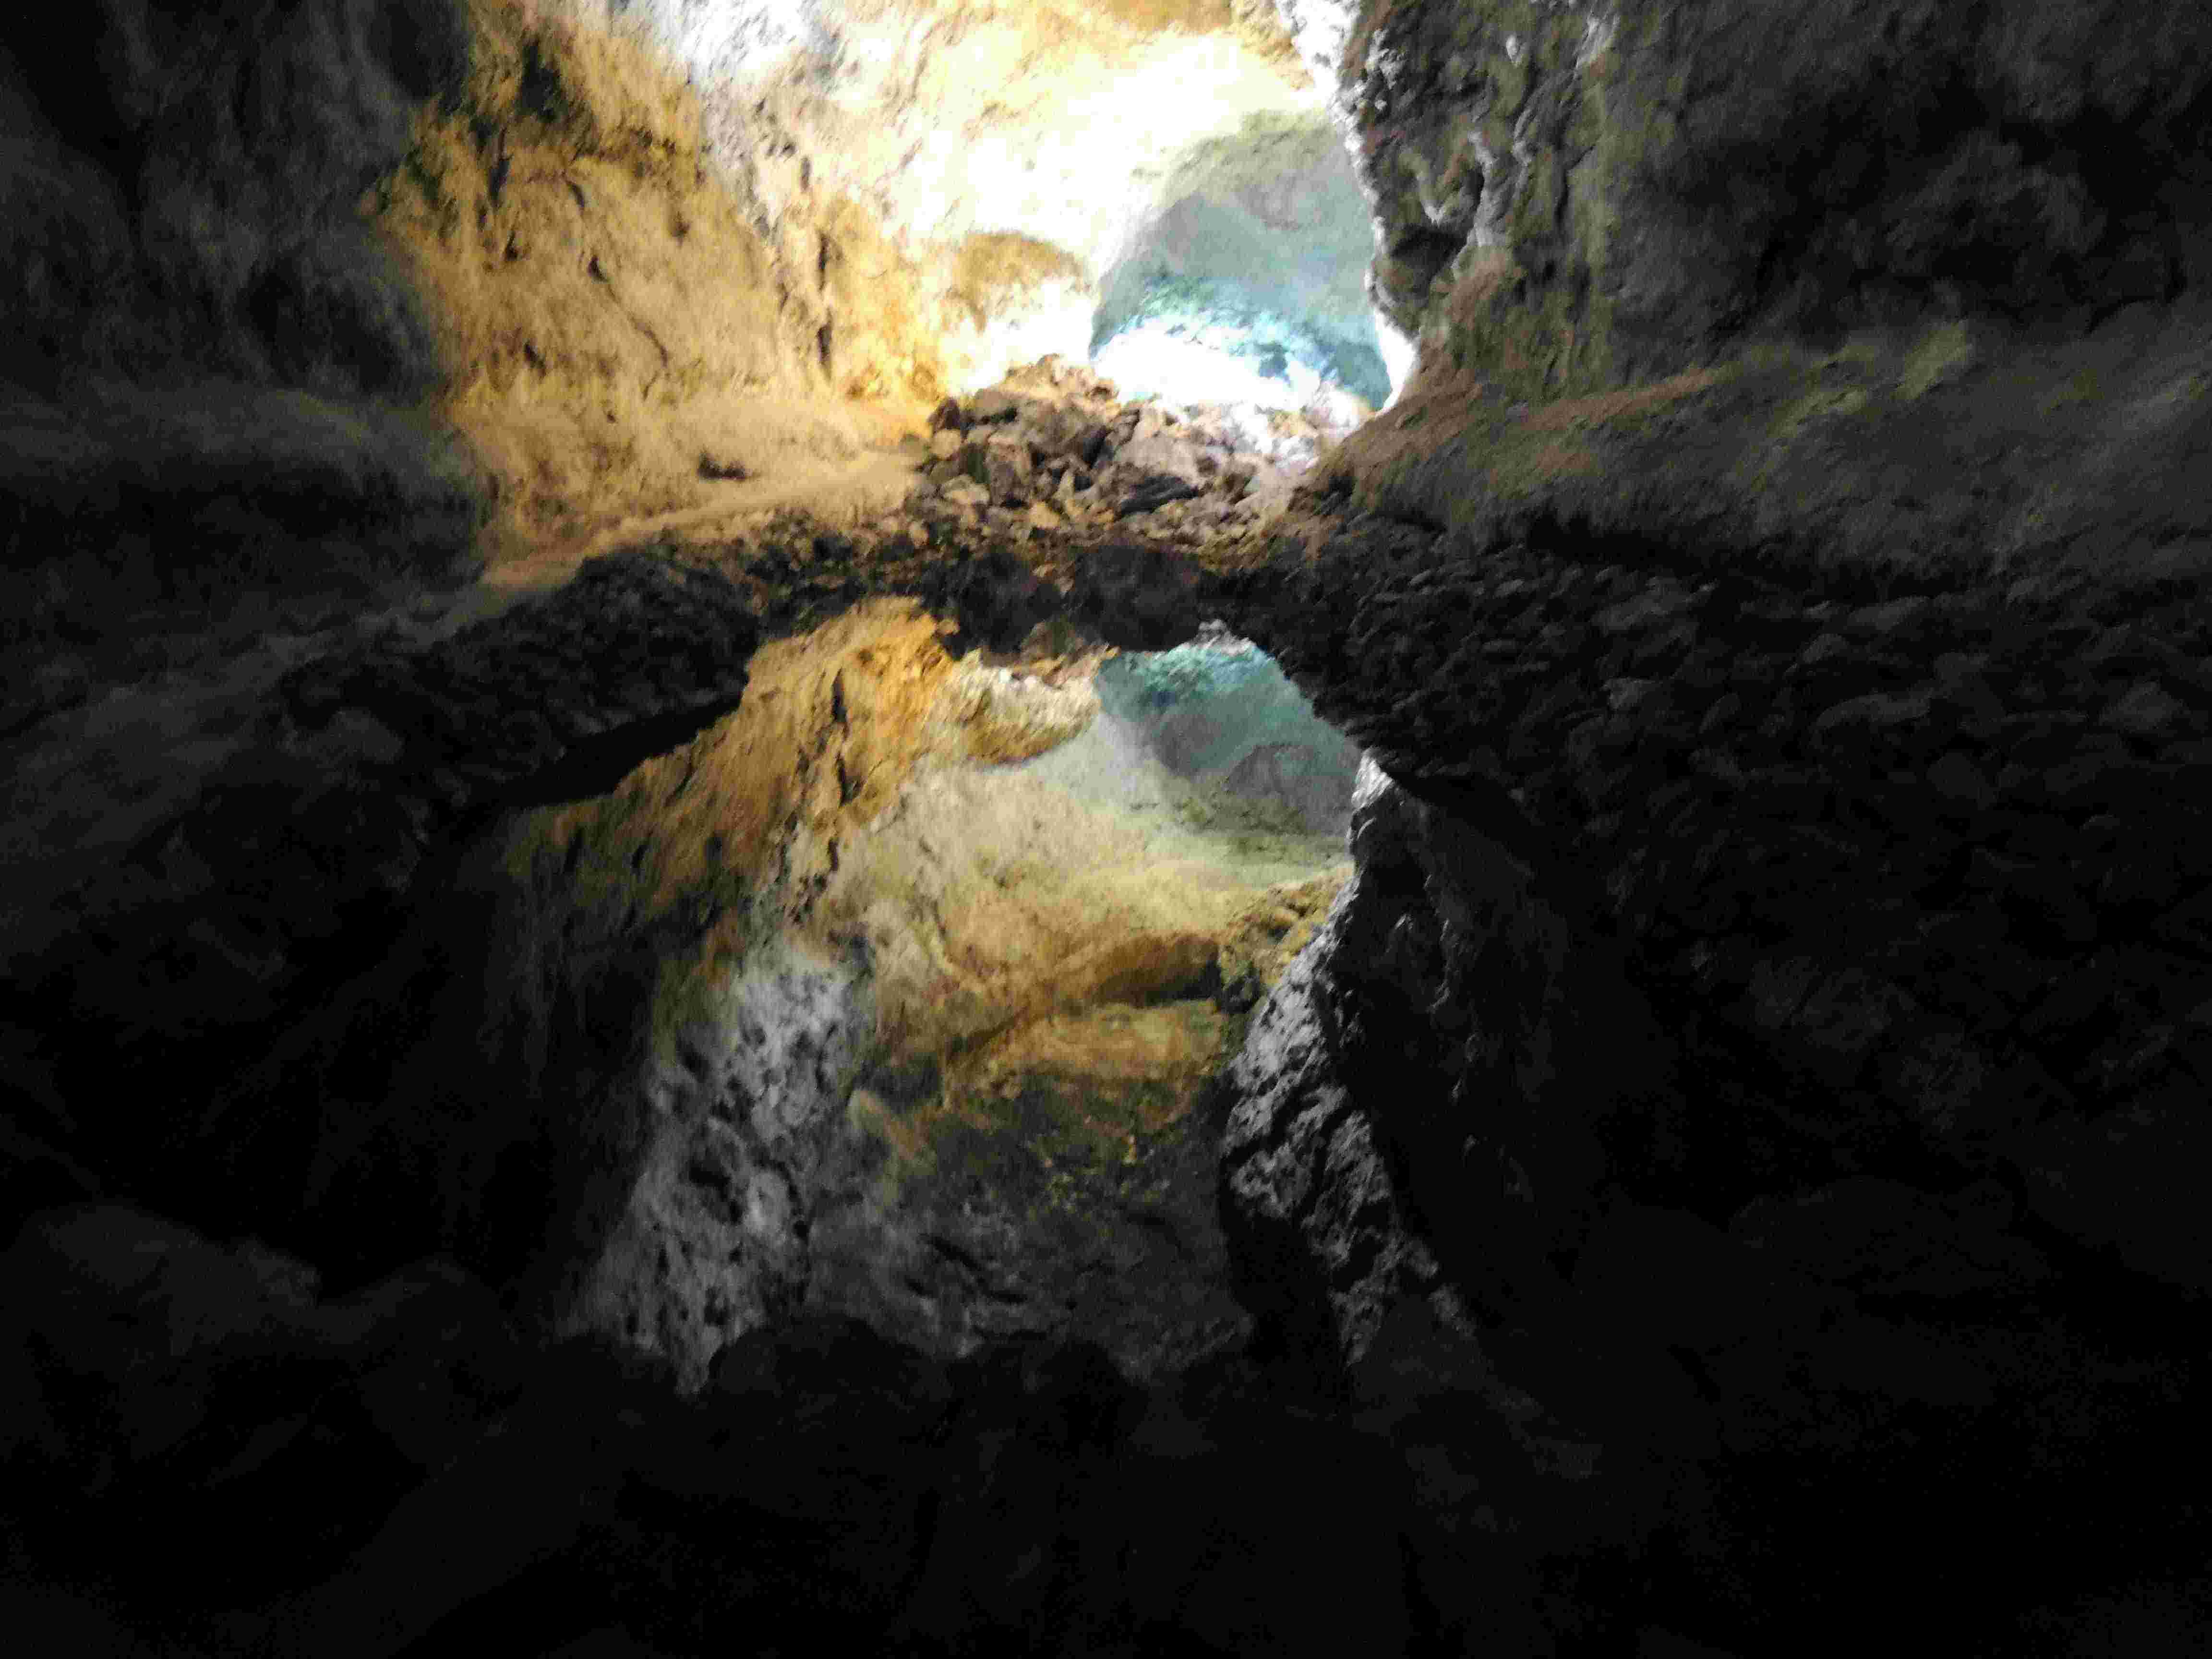 Lava-tube cave appears to have a deep gorge